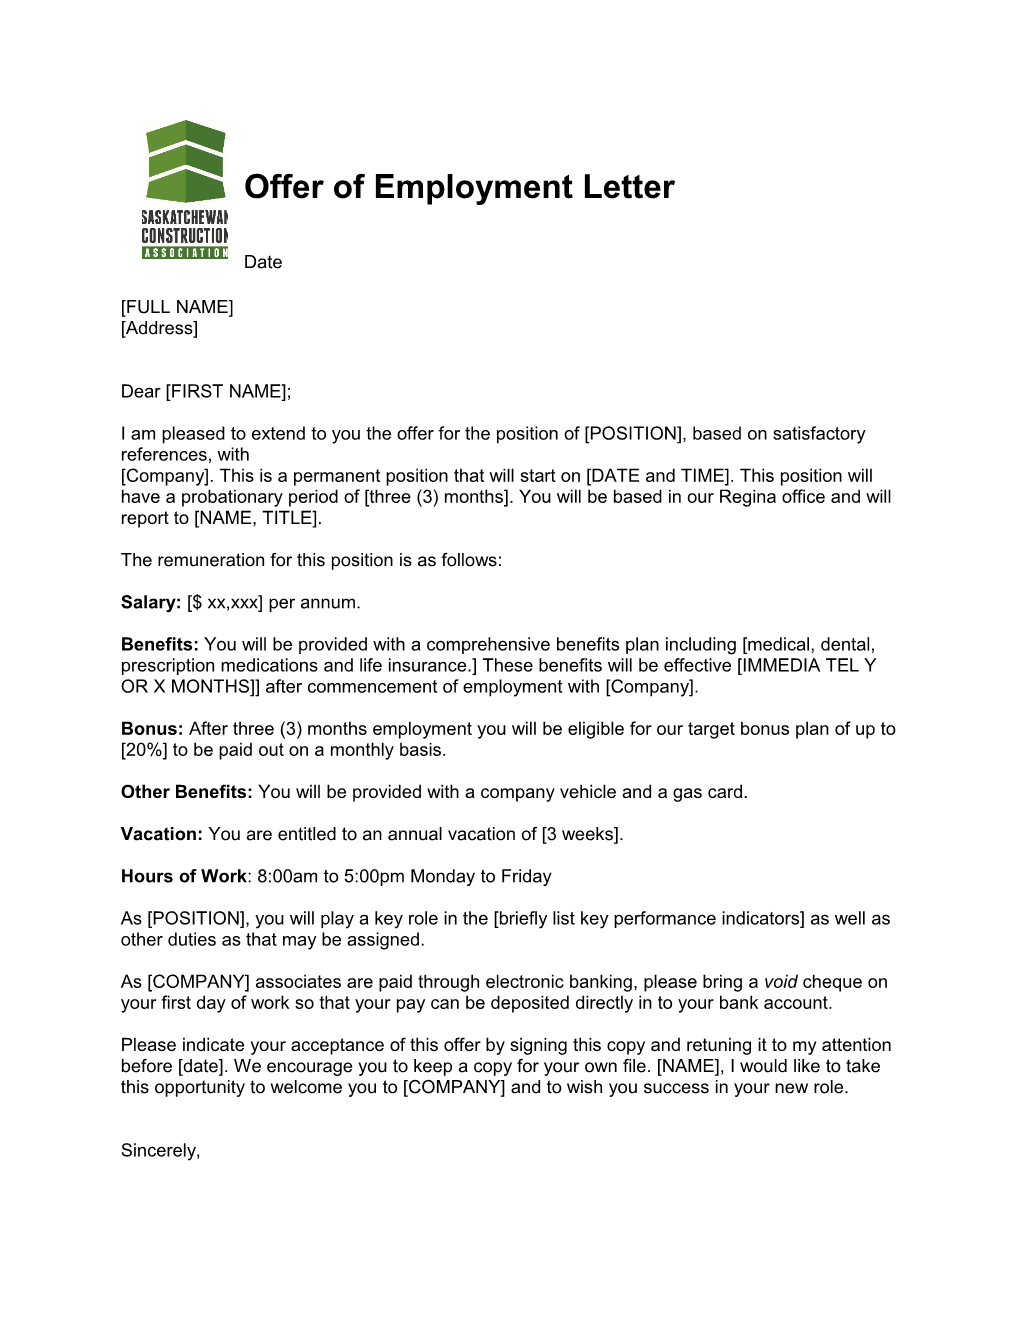 Offer of Employment Letter